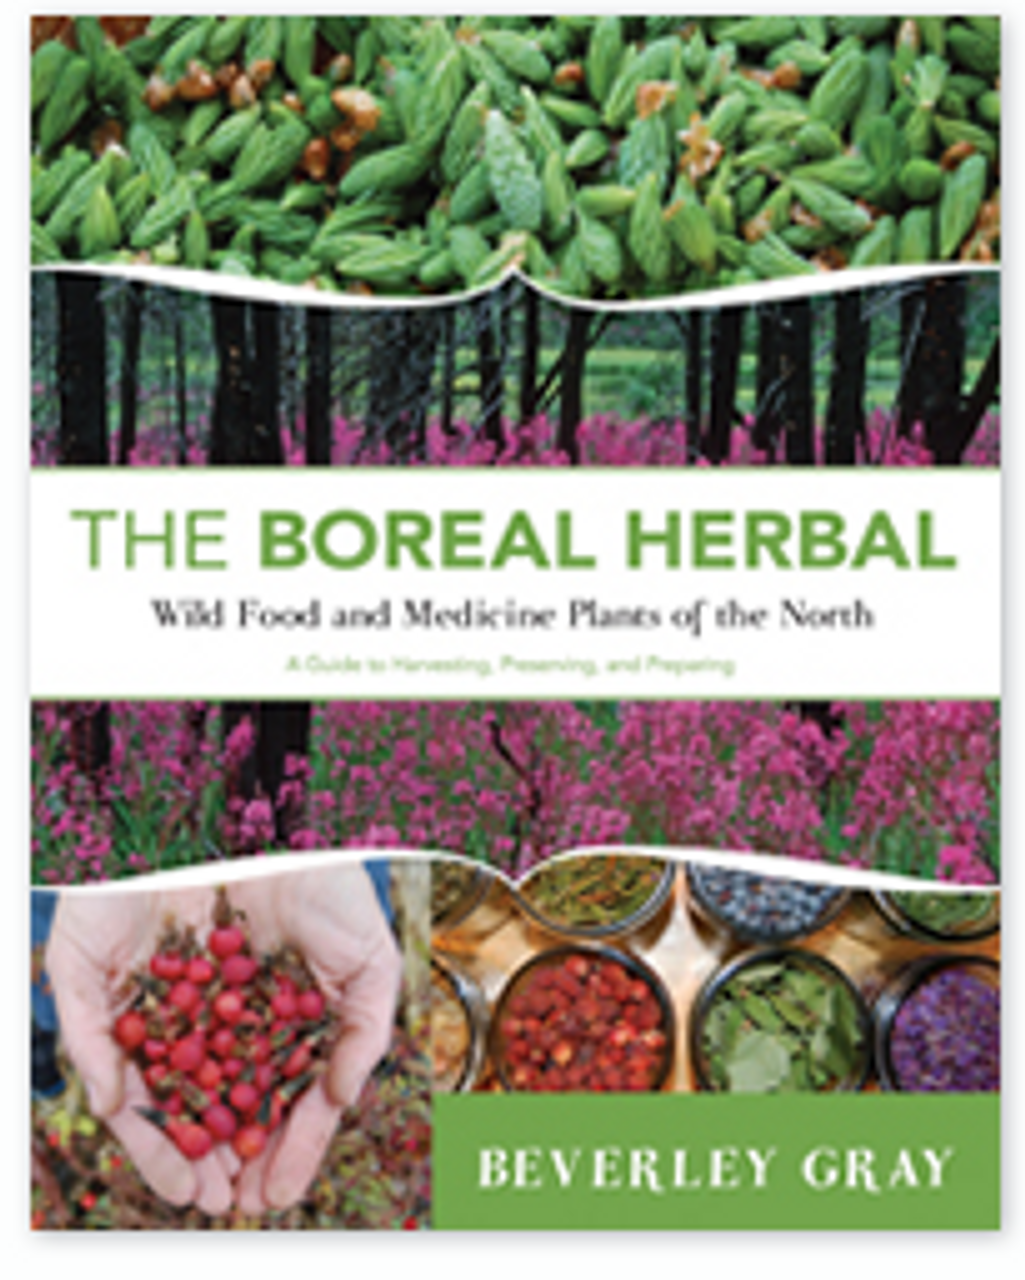 THE BOREAL HERBAL